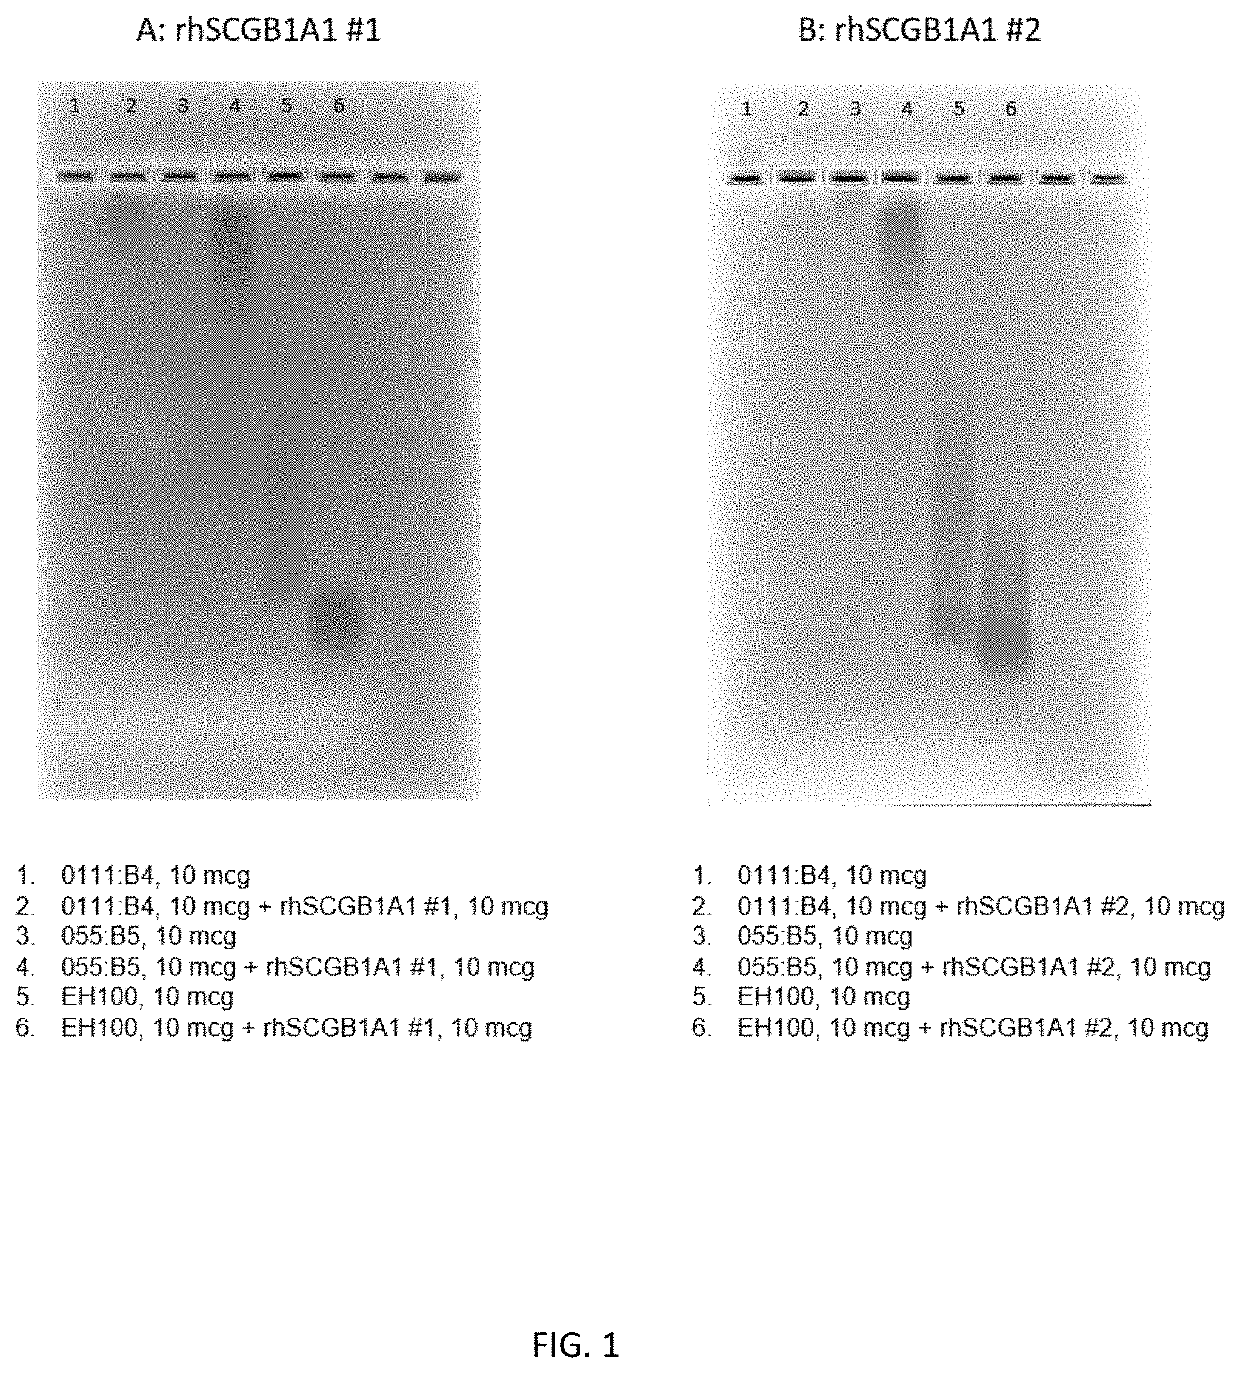 Compositions and methods of use for secretoglobins to protect the glycocalyx via interactions with heparan sulfate proteoglycan proteins